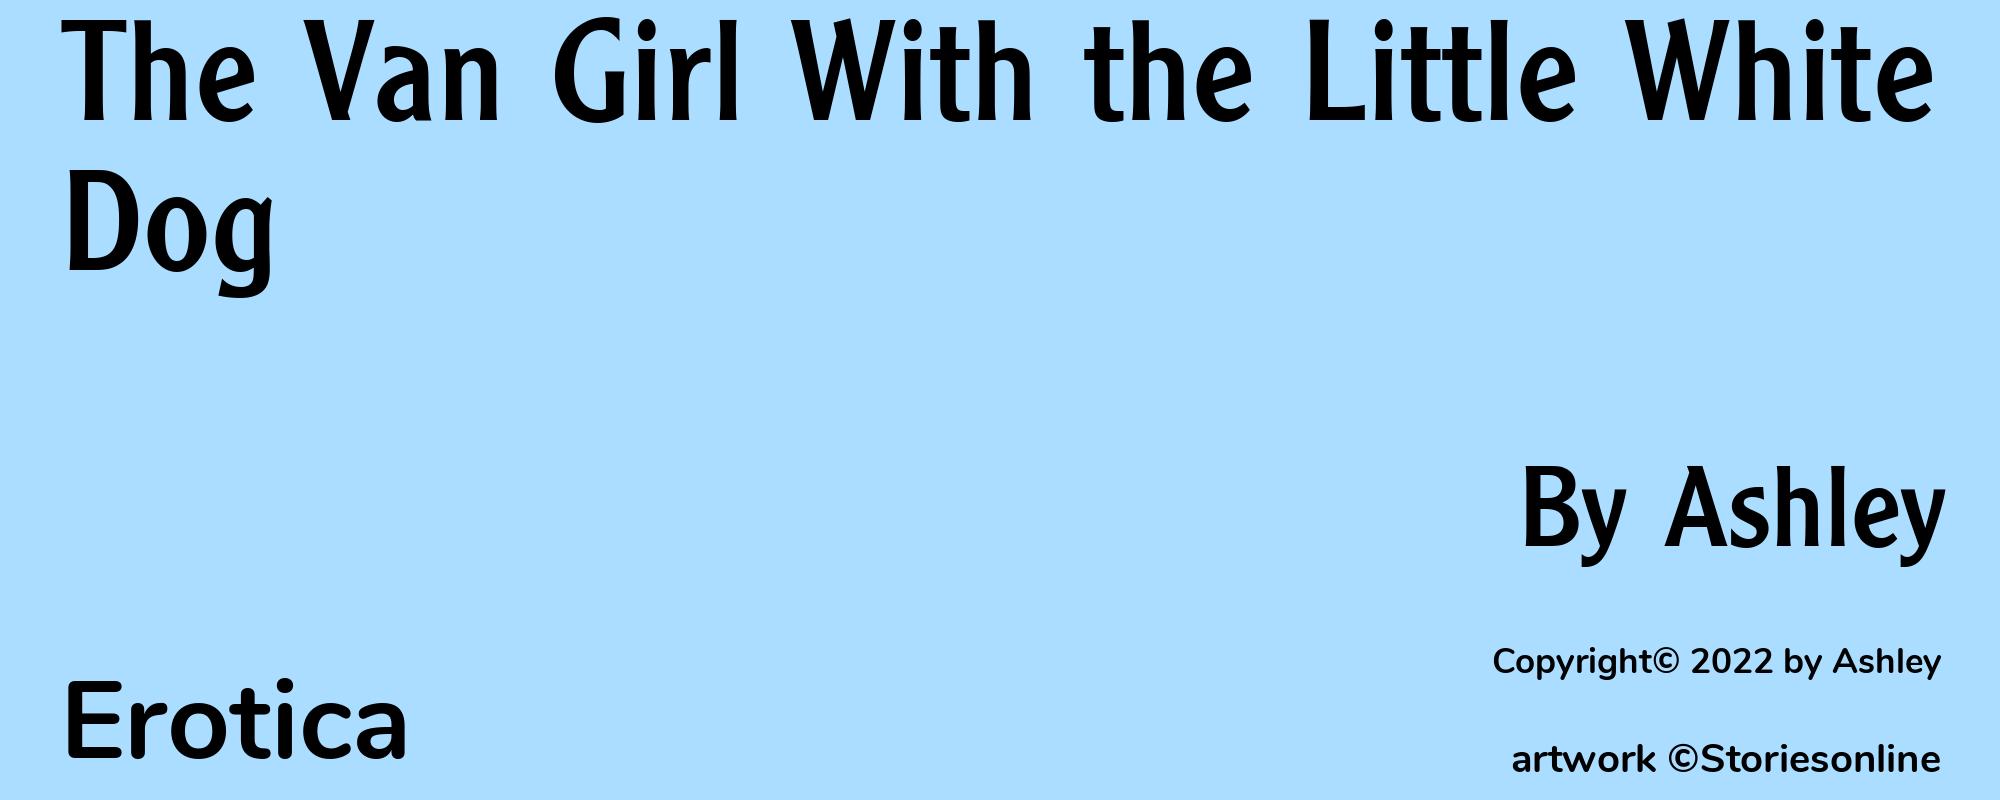 The Van Girl With the Little White Dog - Cover